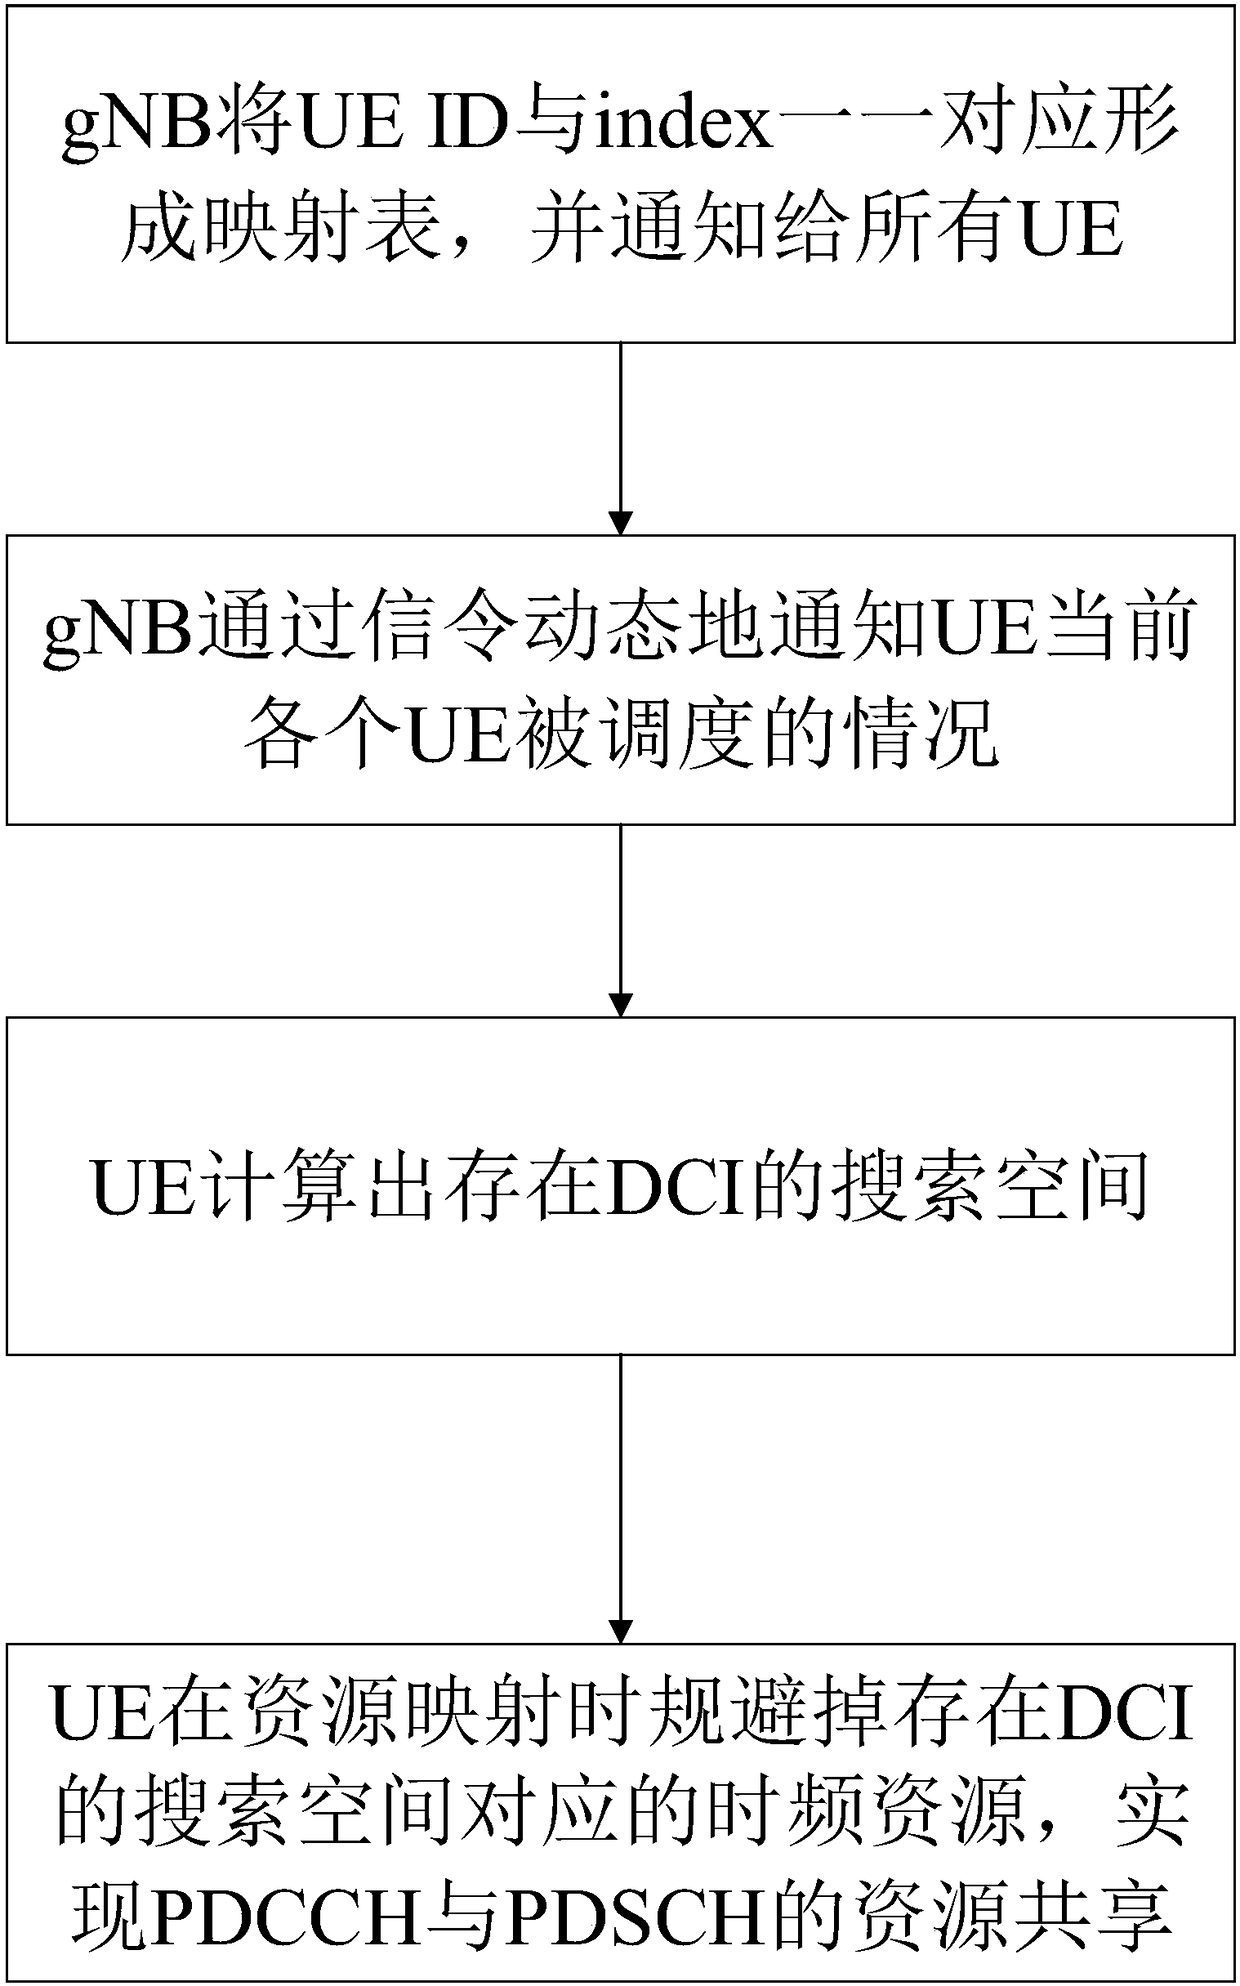 Resource sharing method of PDSCH and PDCCH in NR system